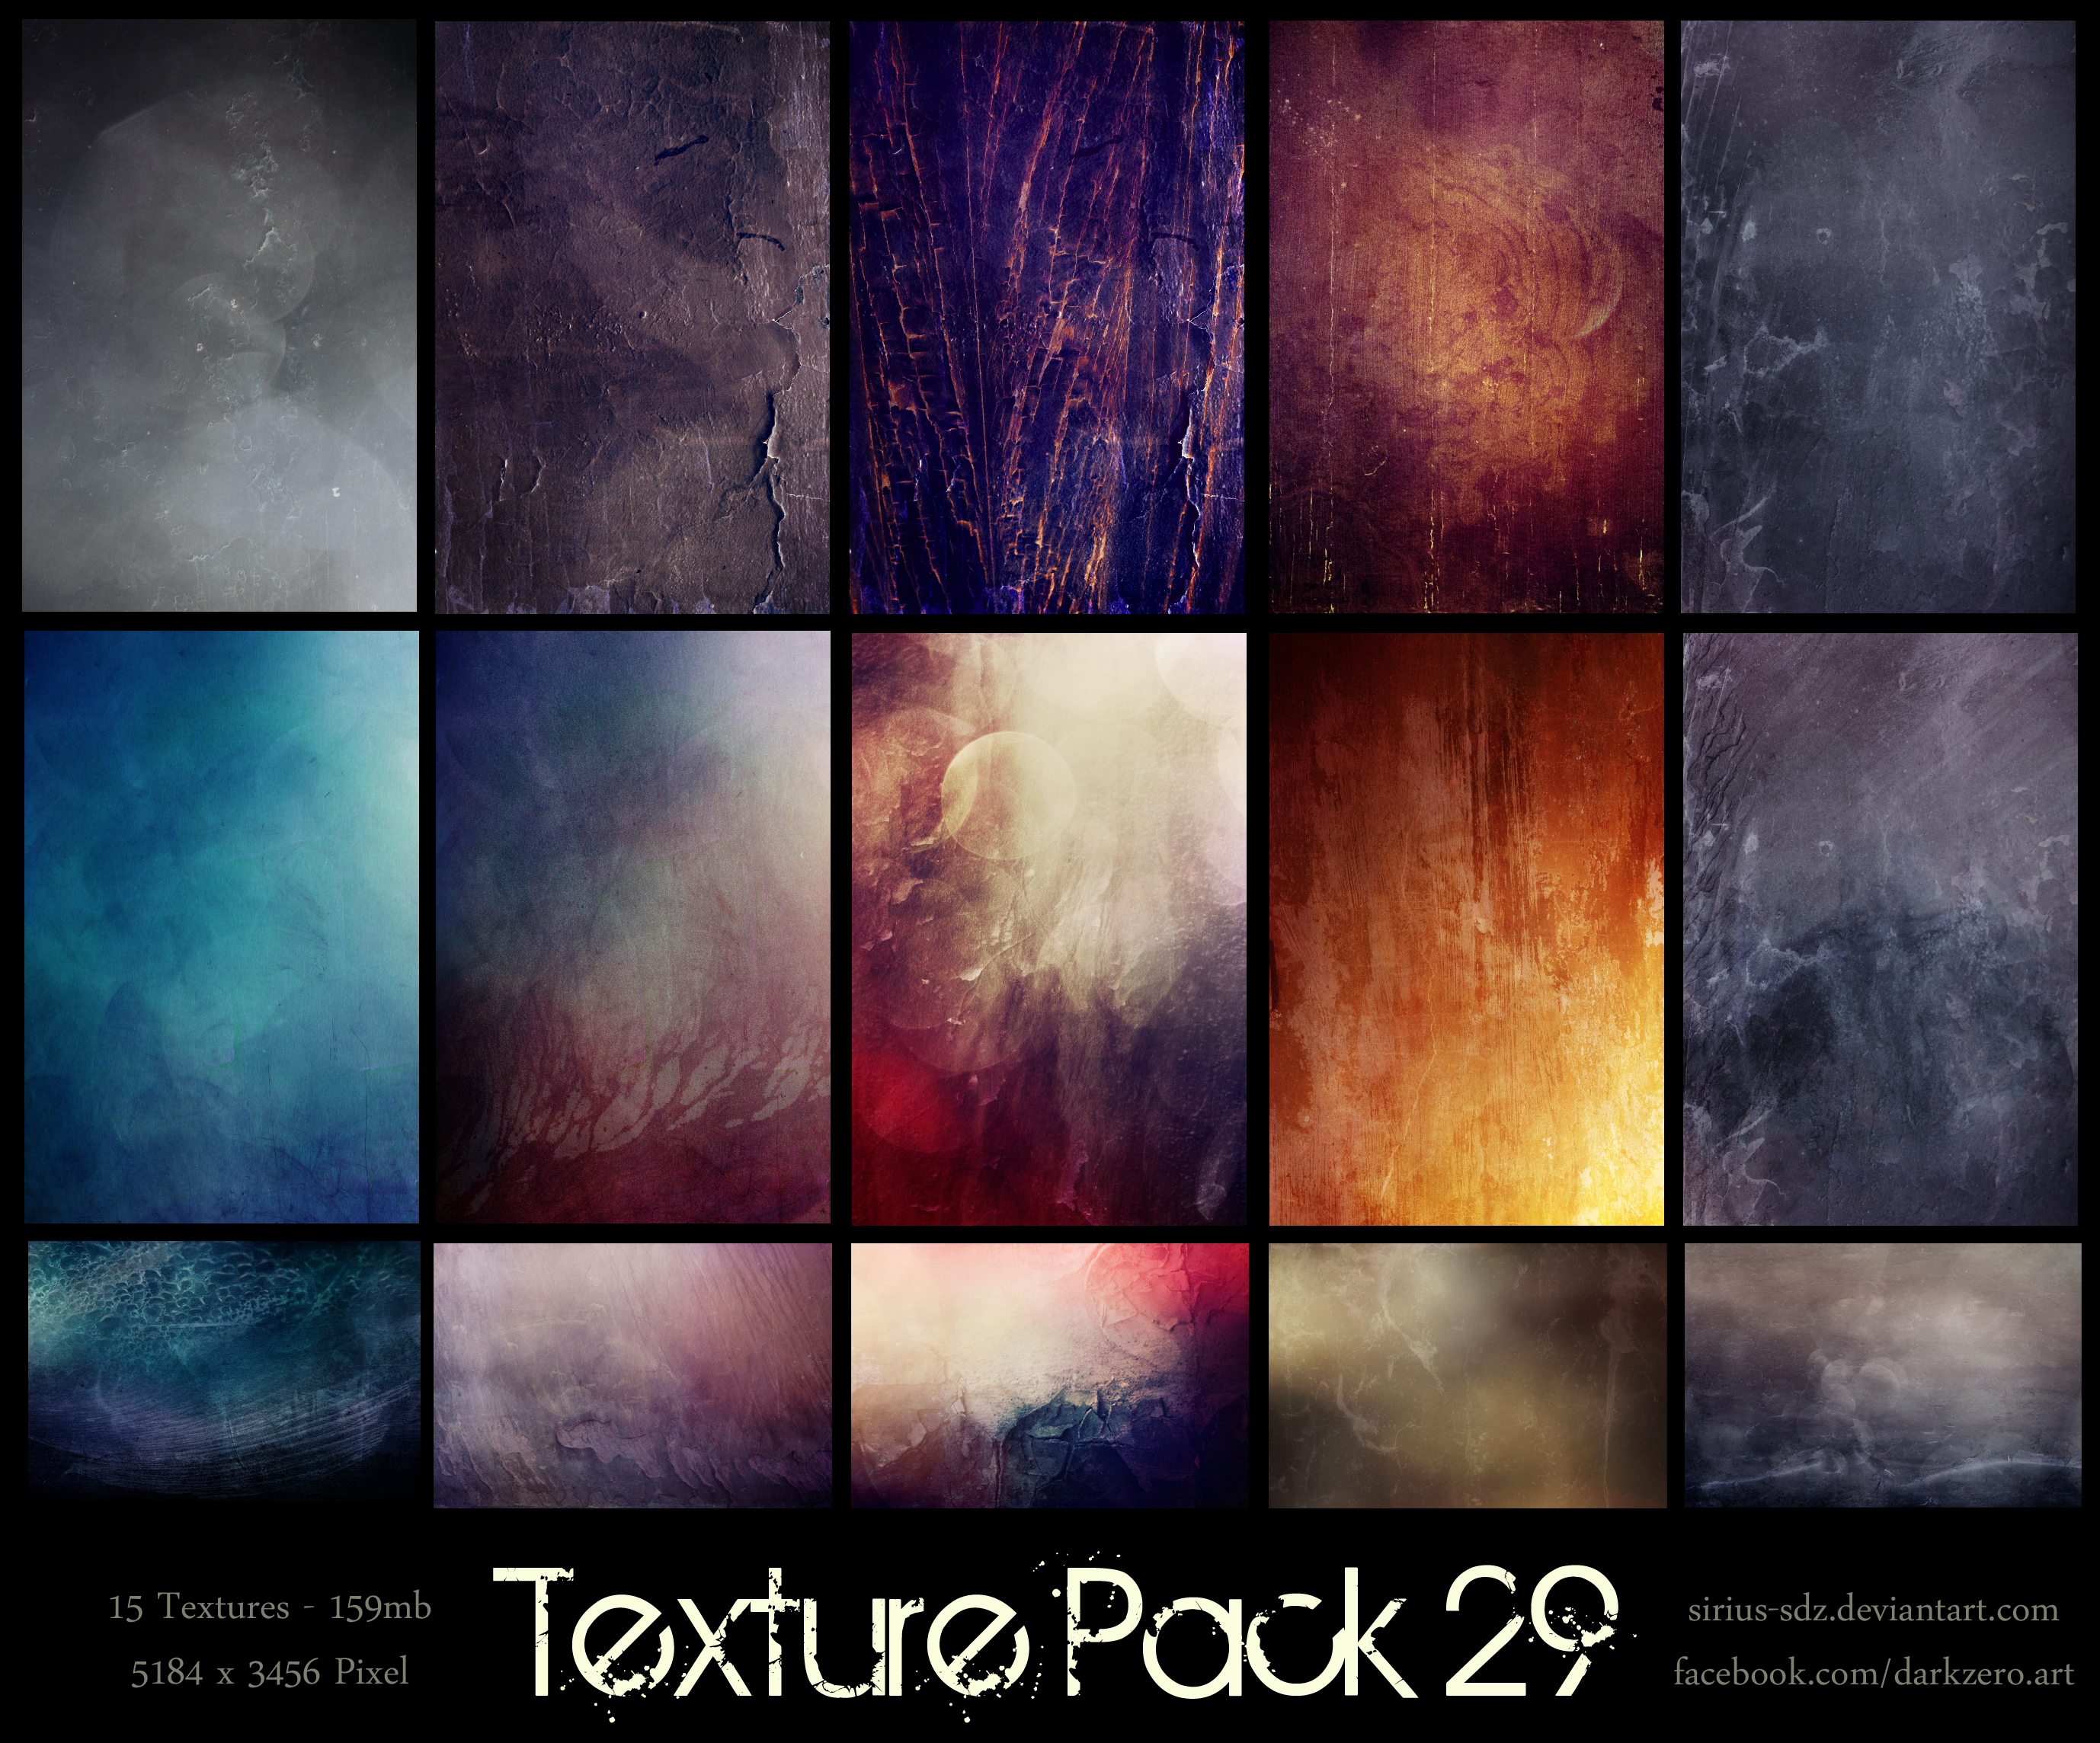 Texture Pack 29